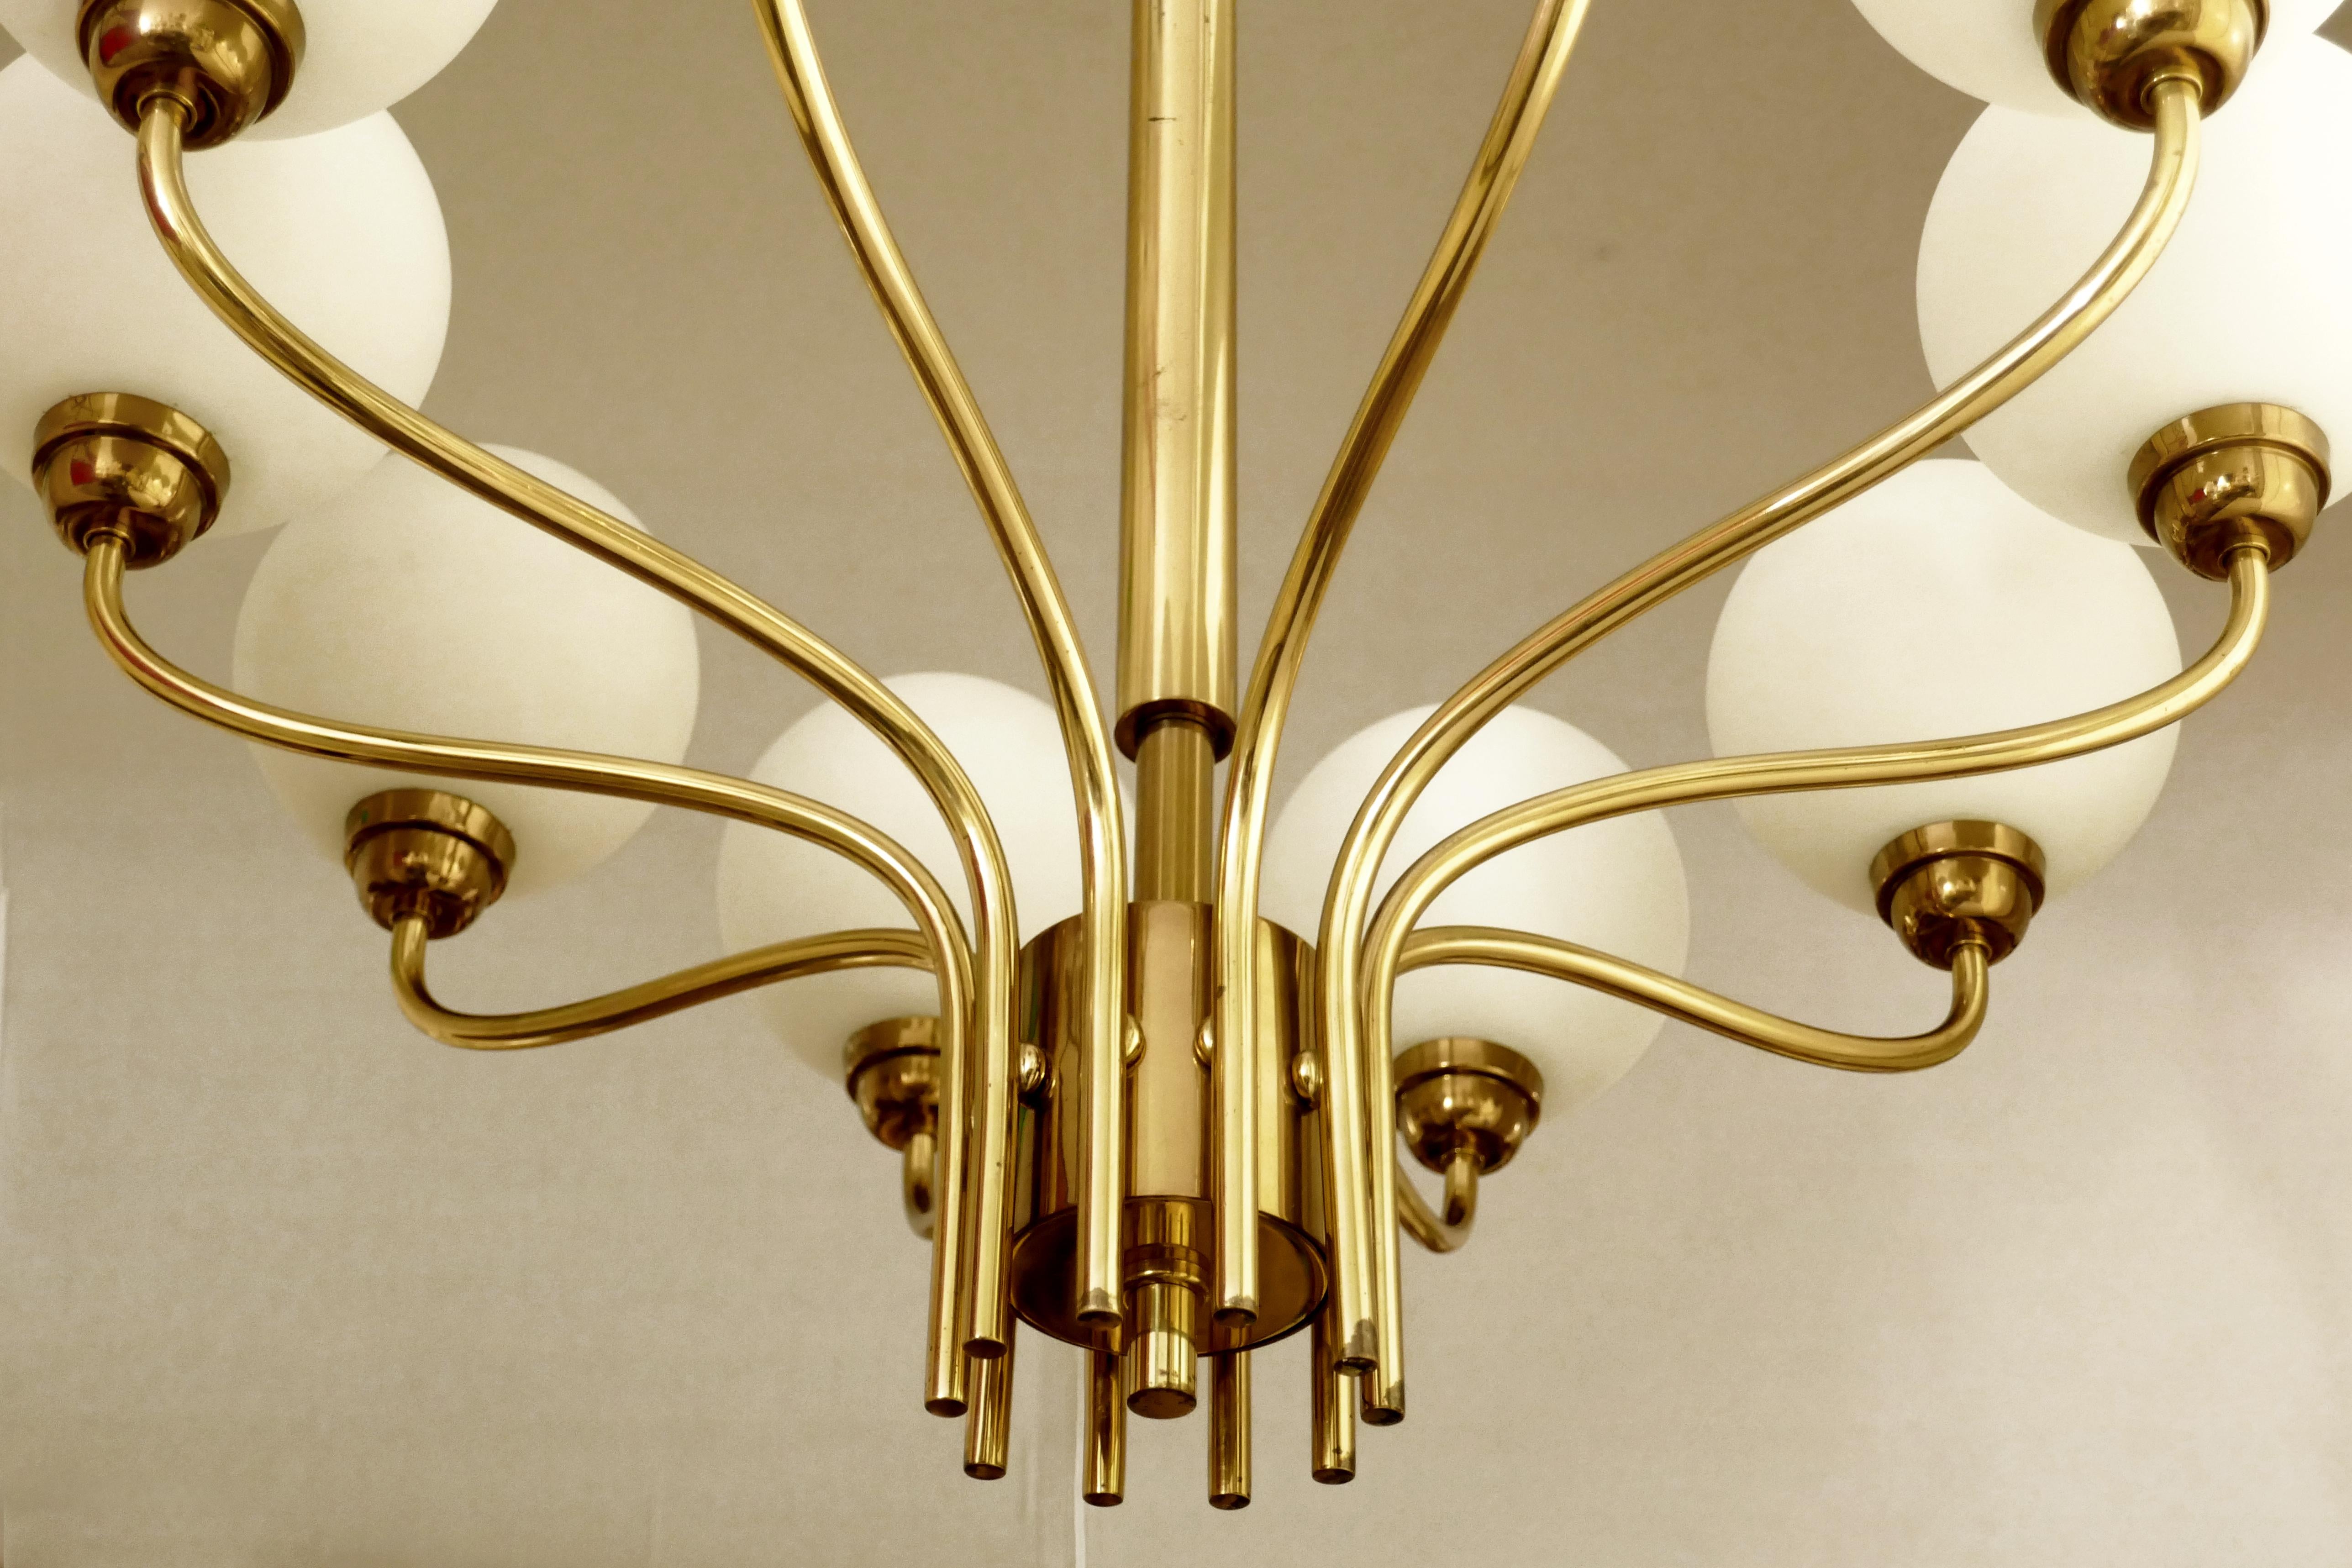 Glass and Brass Chandelier Ceiling Light Pendant, 1960s For Sale 1